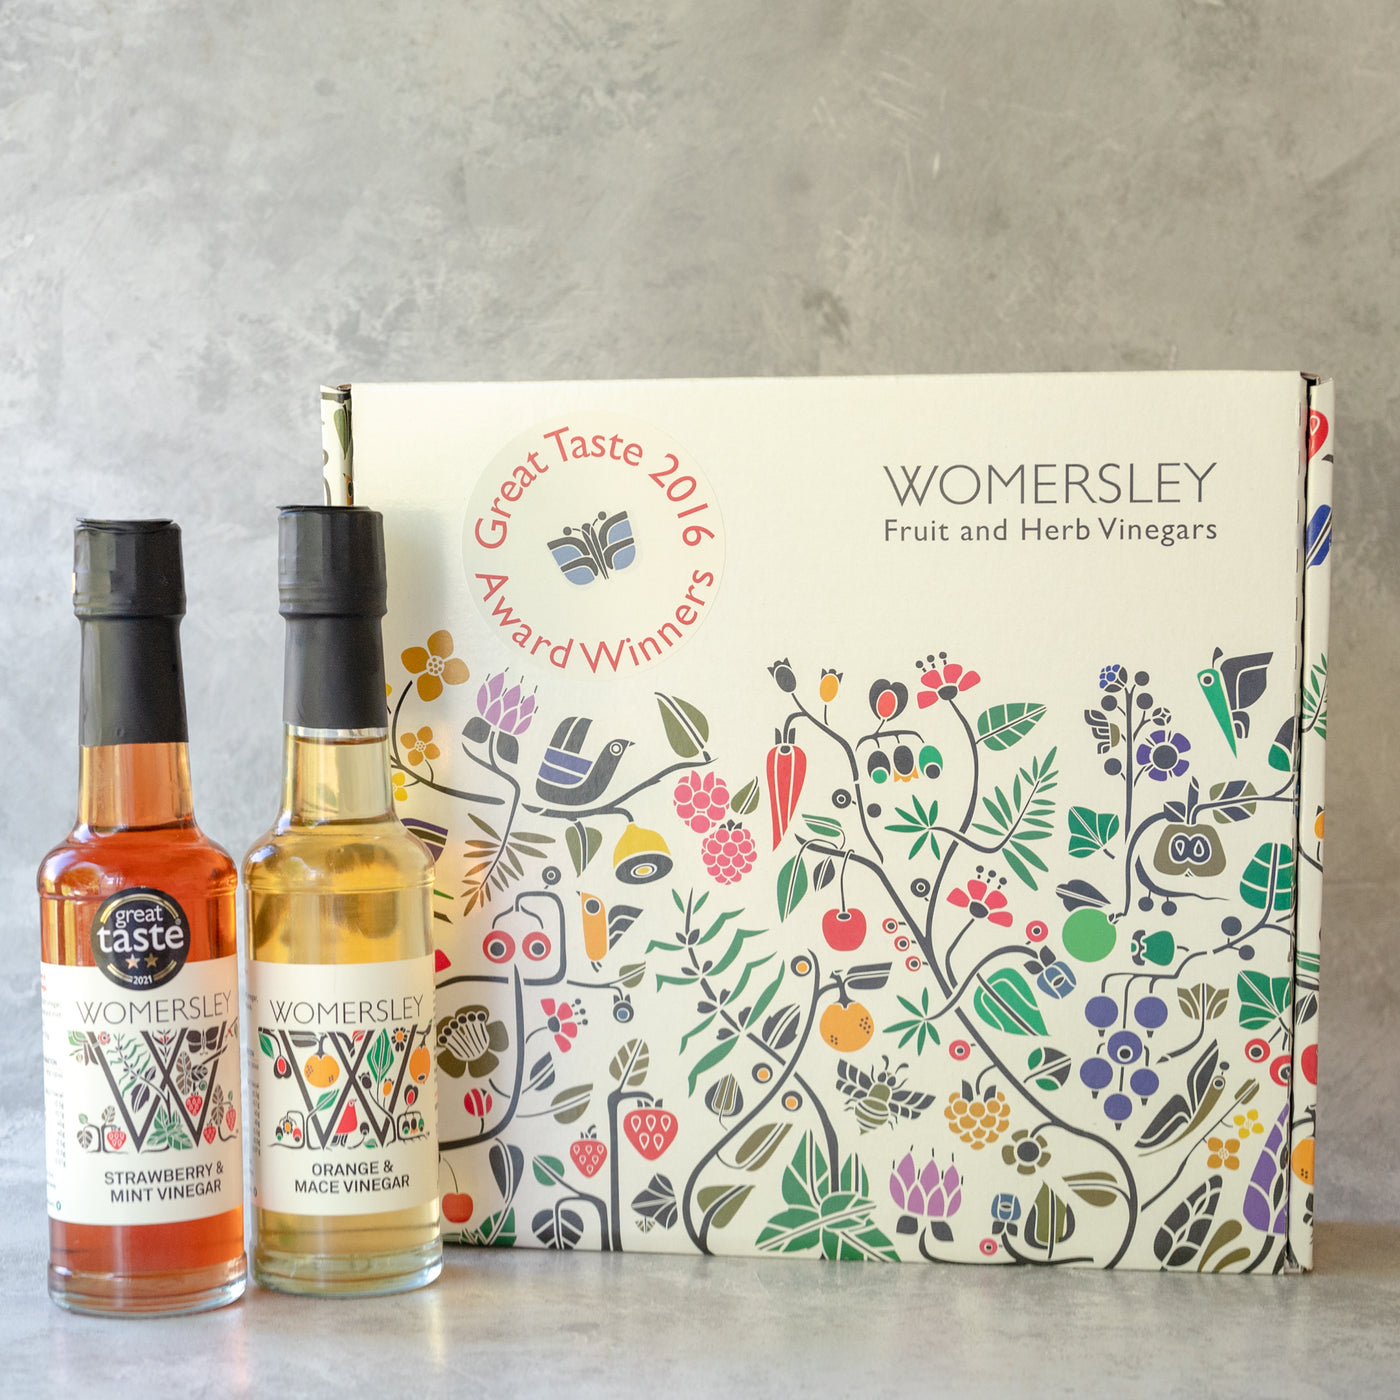 Womersley Foods Fruit & Herb vinegar closed Gift Box Great Taste Award Vinegars, with ingredients. Featuring 150ml Strawberry and Mint fruit vinegar and Orange and Mace fruit vinegar standing in front of box on a grey background.